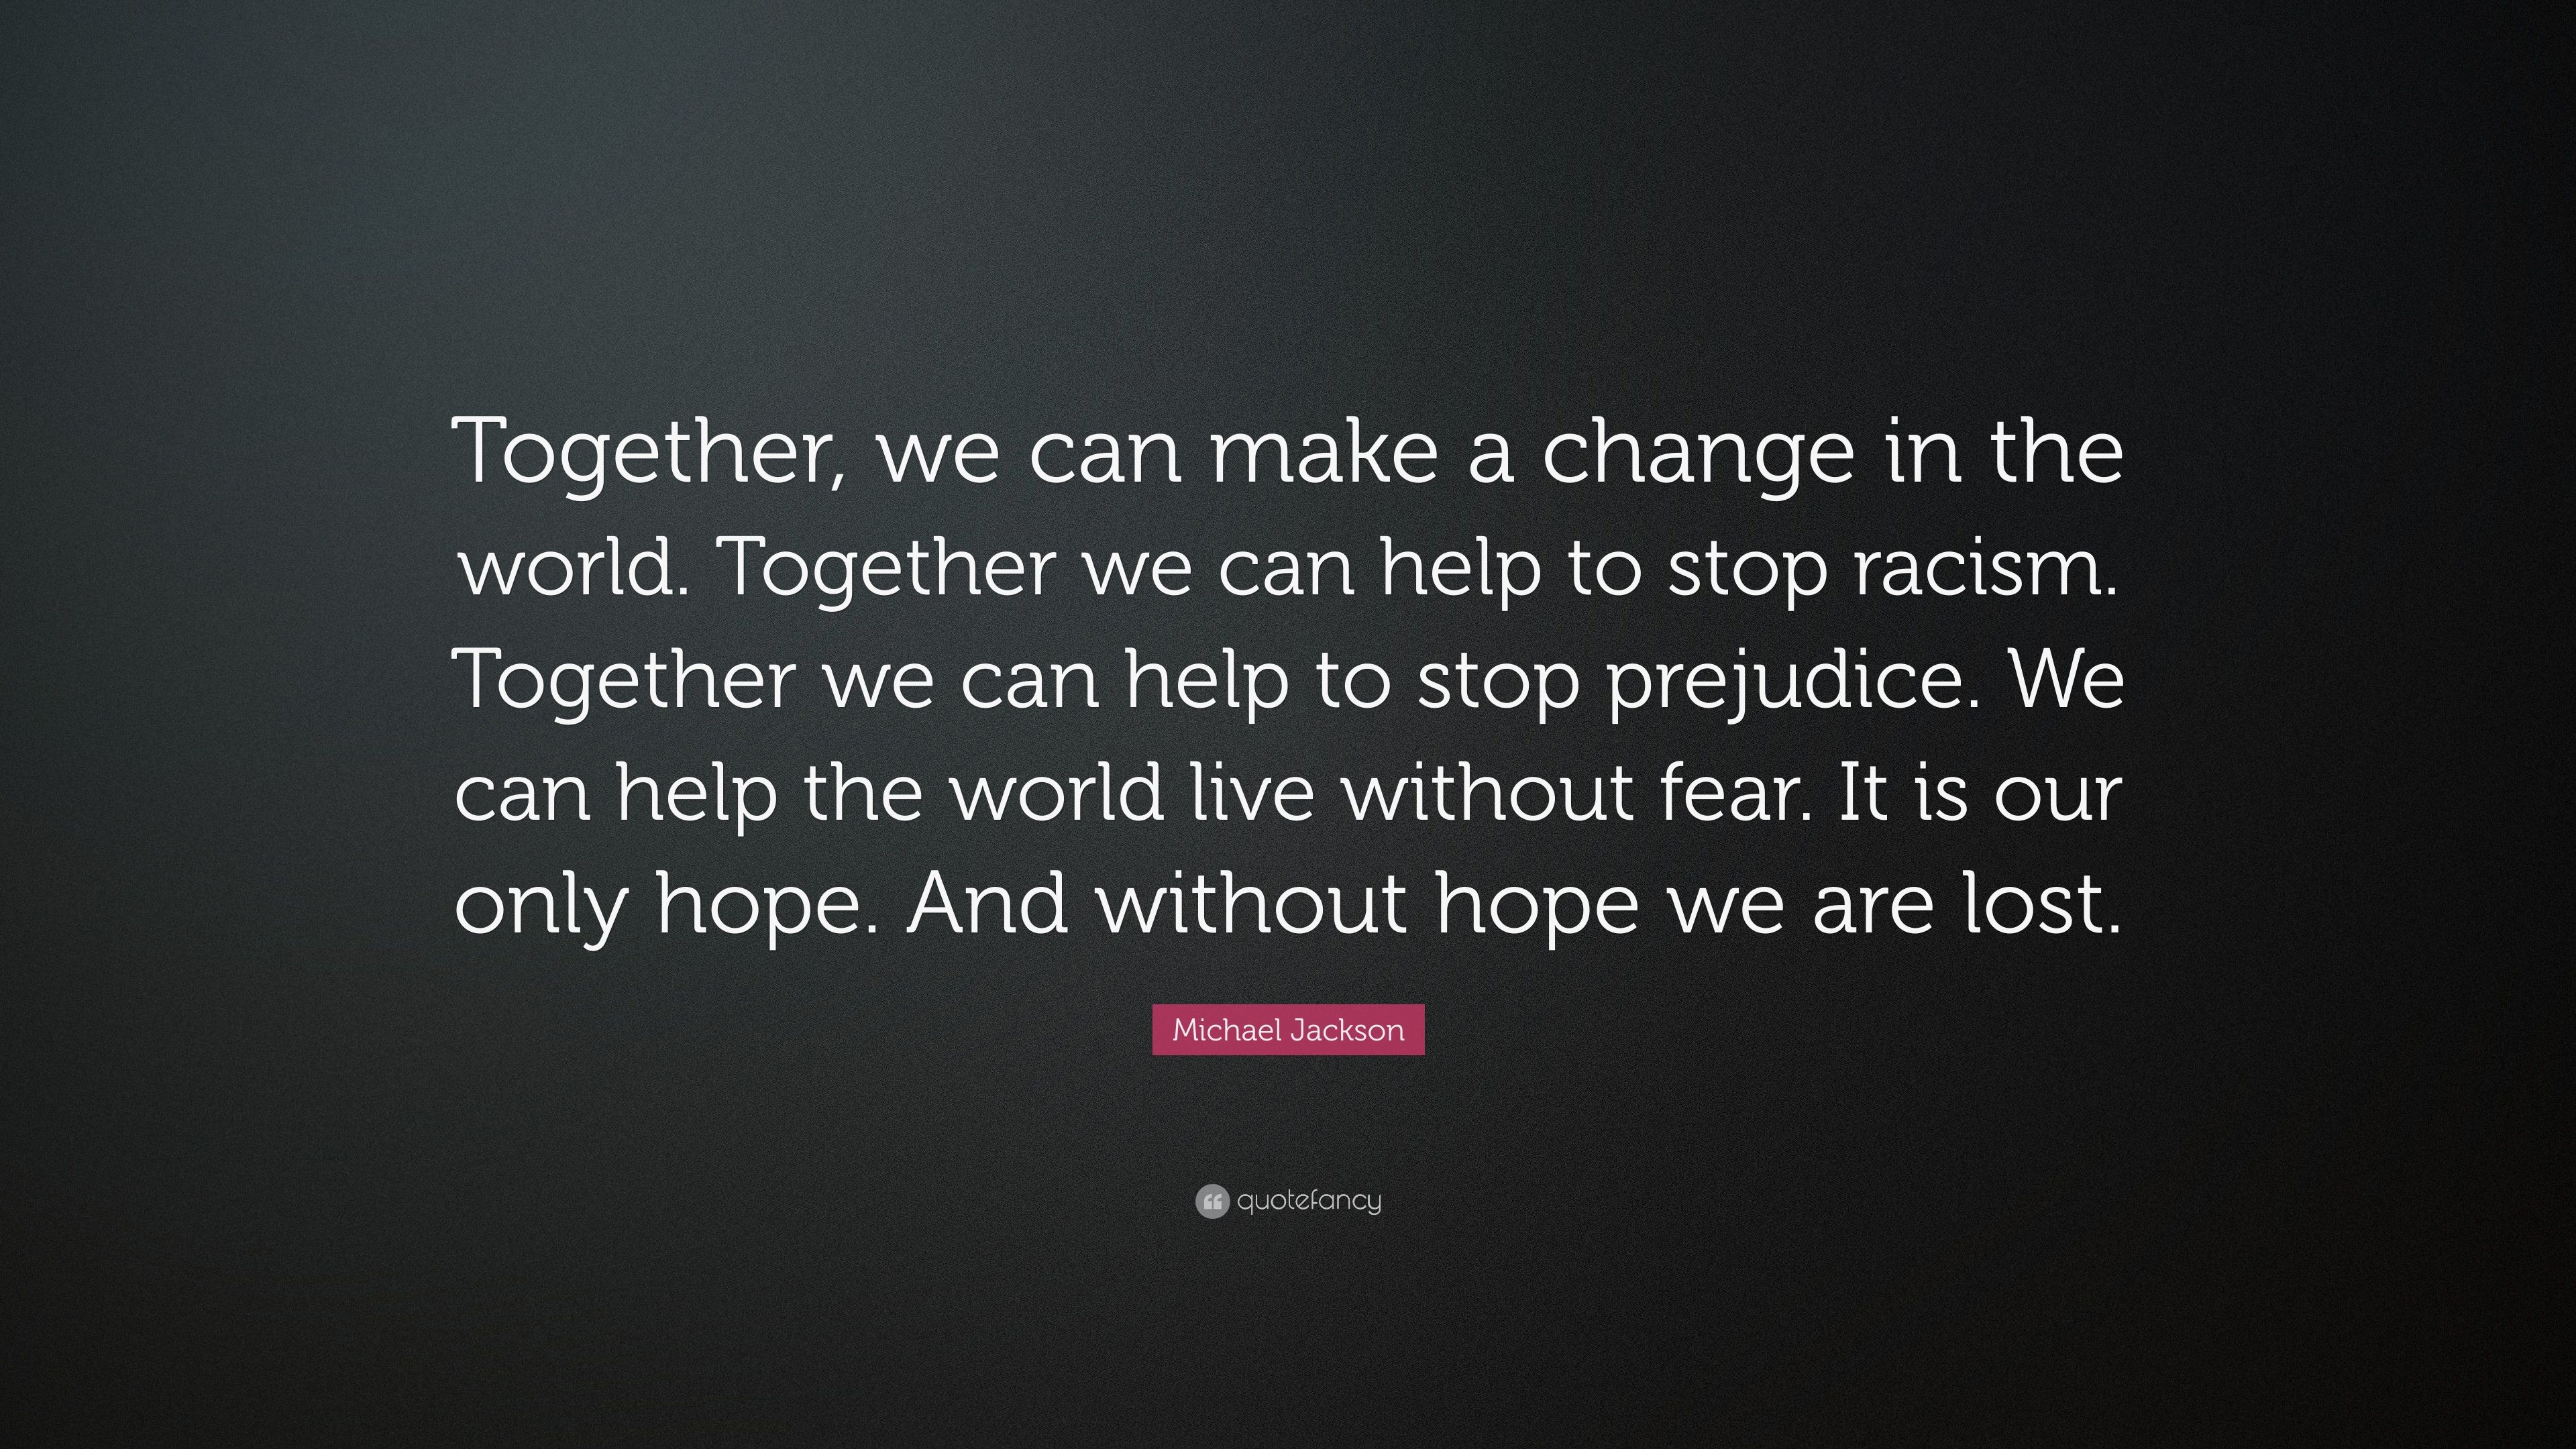 Michael Jackson Quote: “Together, we can make a change in